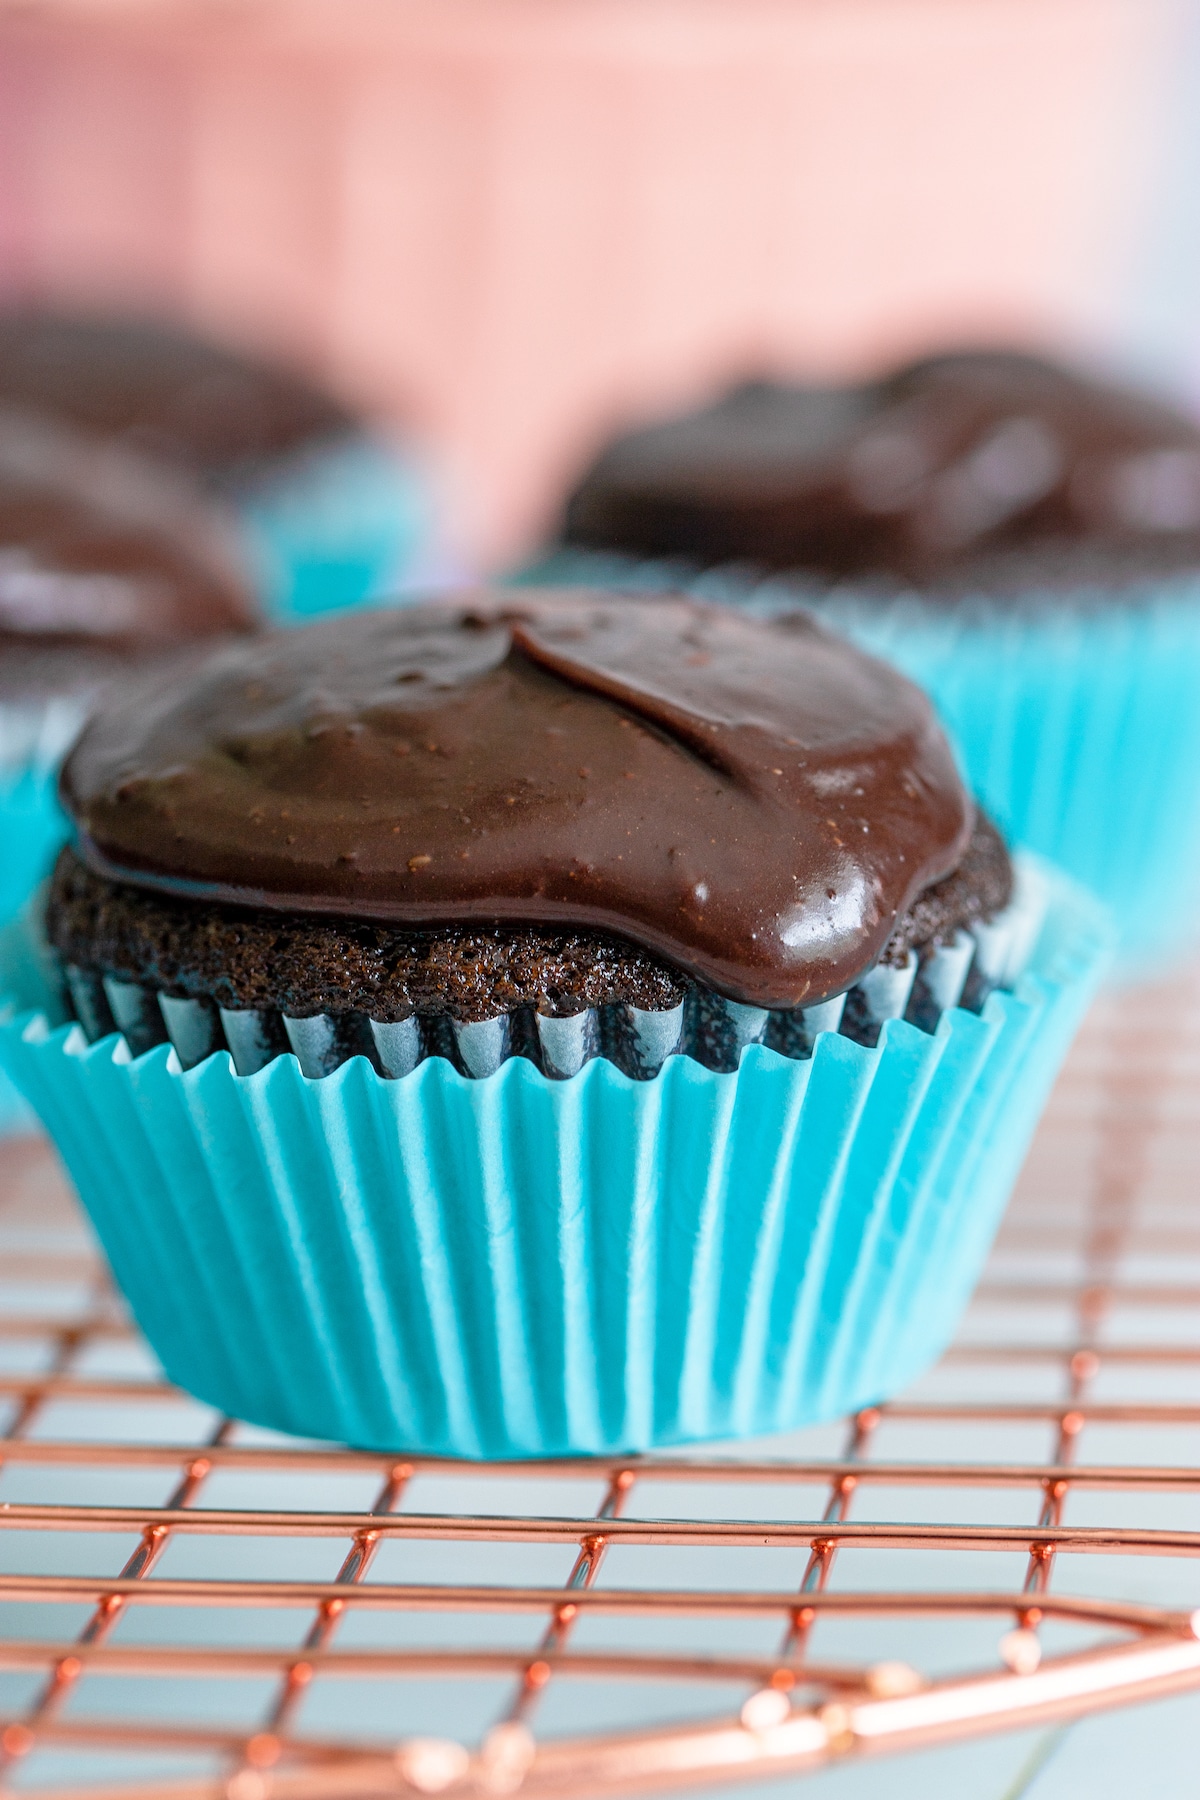 Close up photo of best chocolate cupcakes with chocolate frosting in a blue cupcake liner